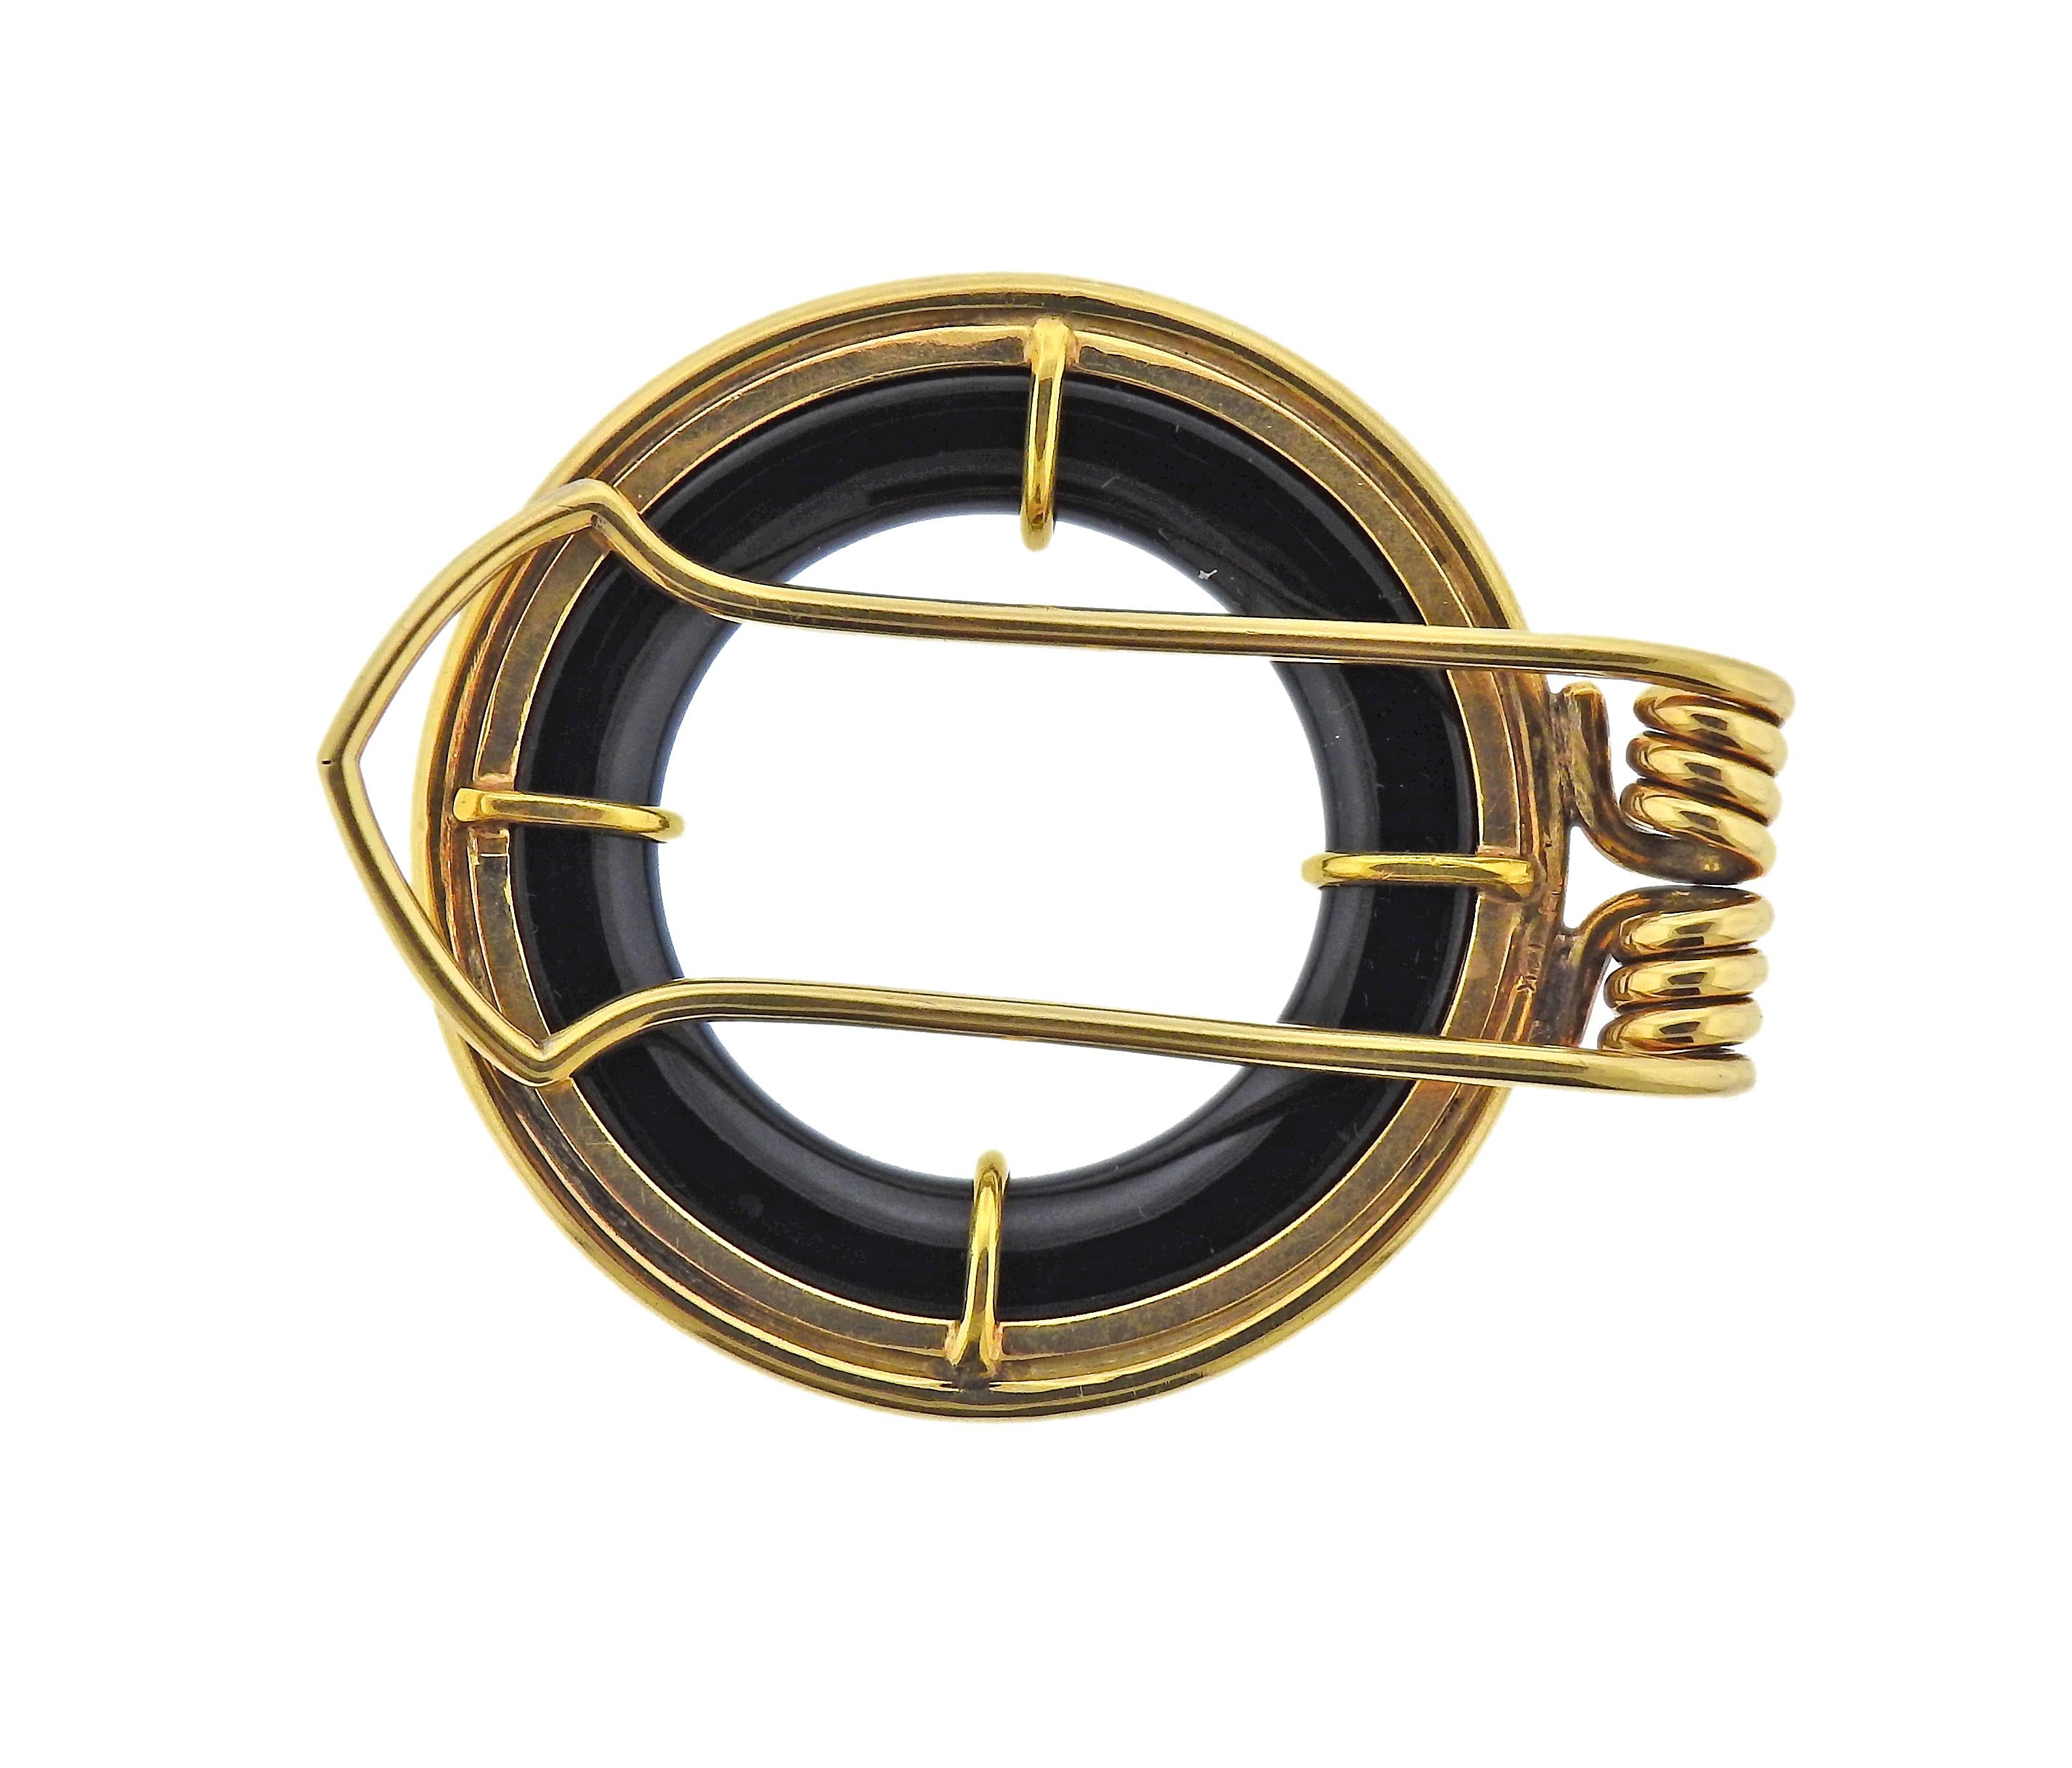 14k gold onyx clip. Measuring 45mm in diameter x 53mm long. Marked 14k. Weight - 24.2 grams.